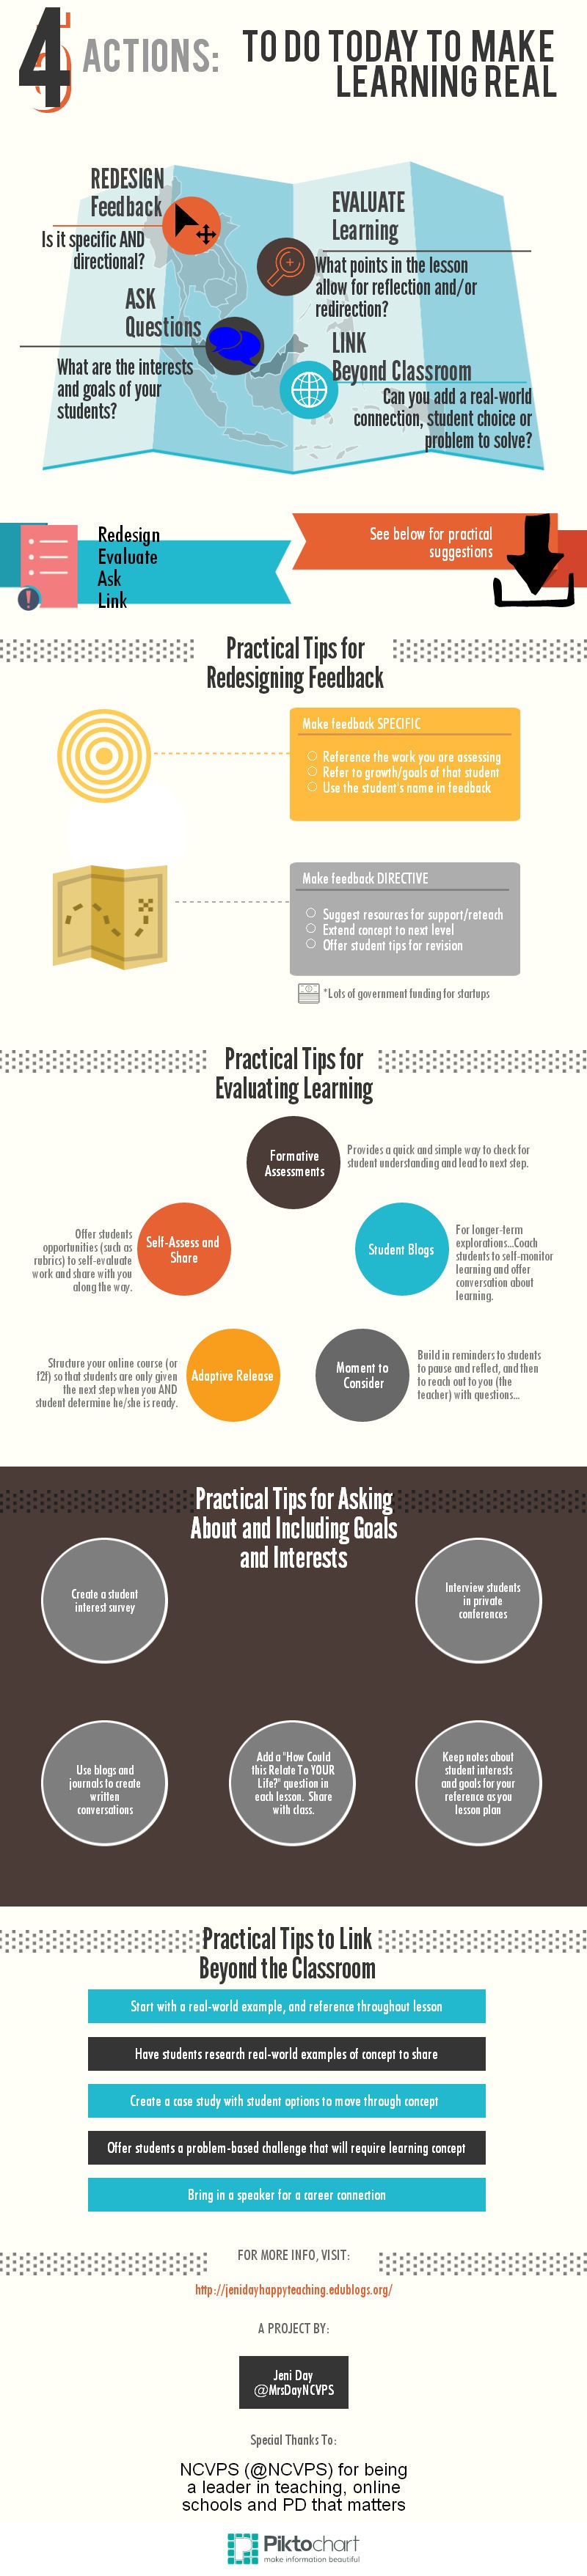 Steps to Real Learning Infographic